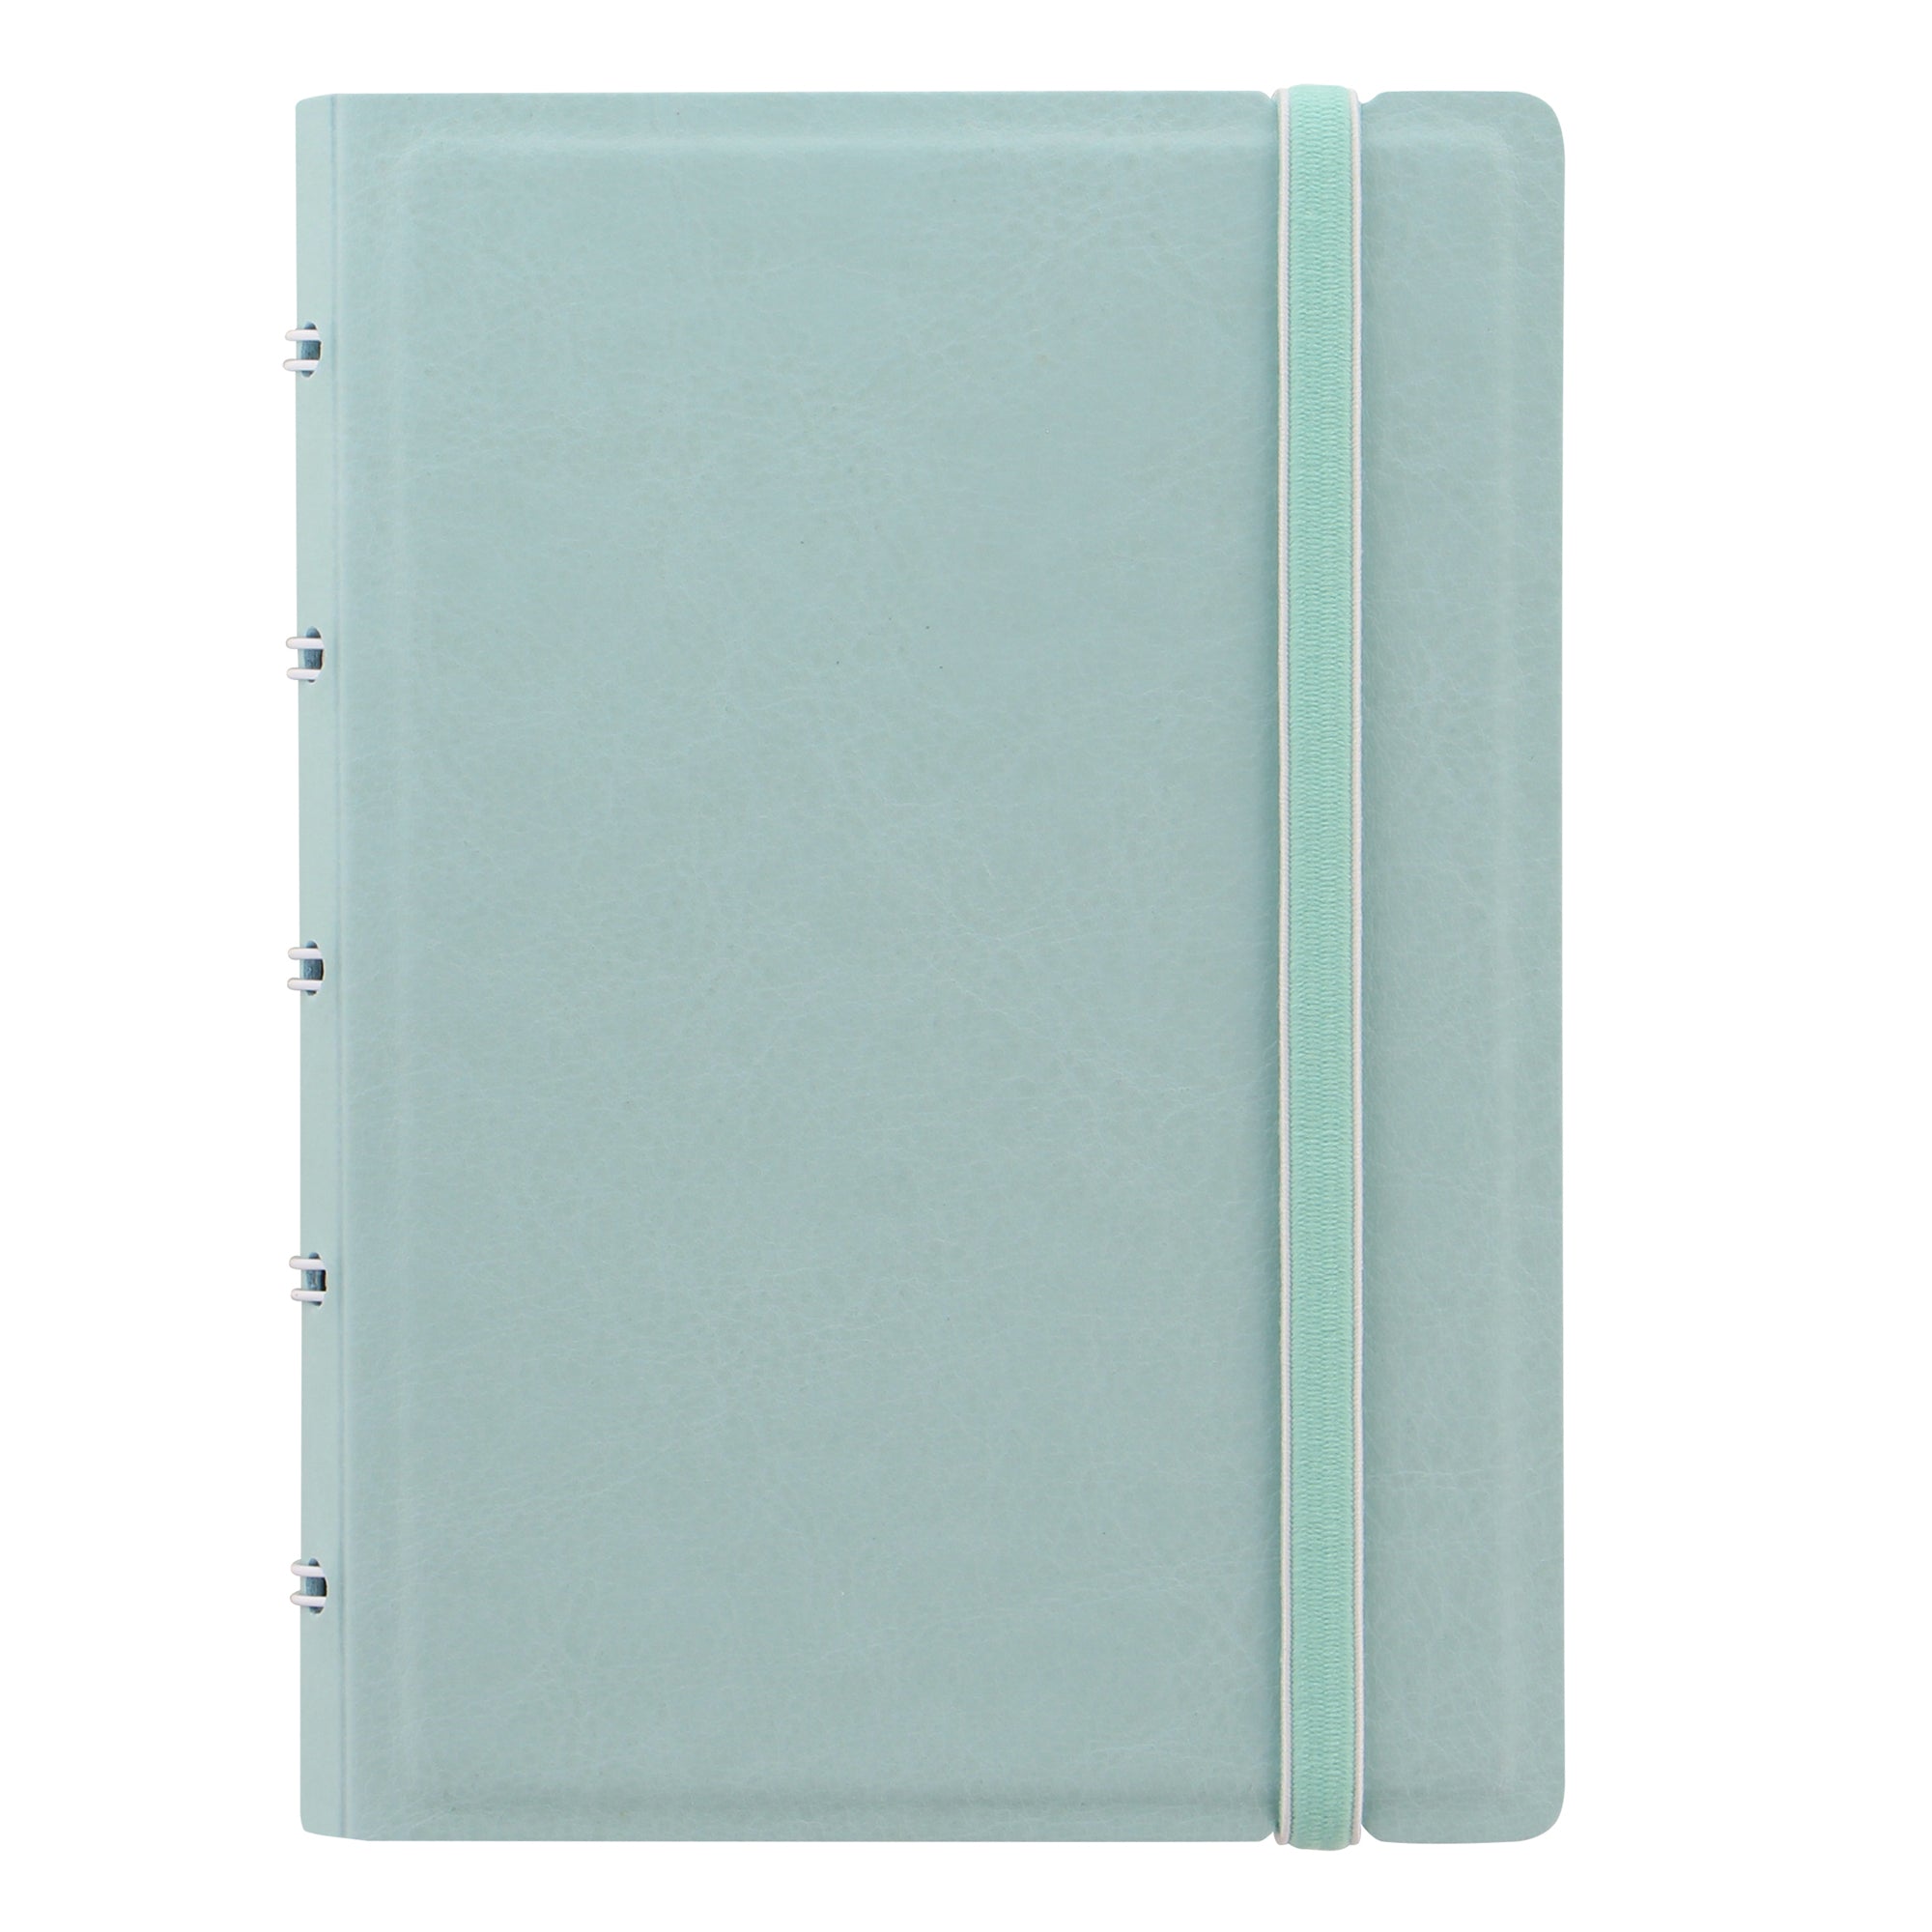 filofax-notebook-pocket-f-to-144x105mm-righe-56-pag-verde-pastello-similpelle